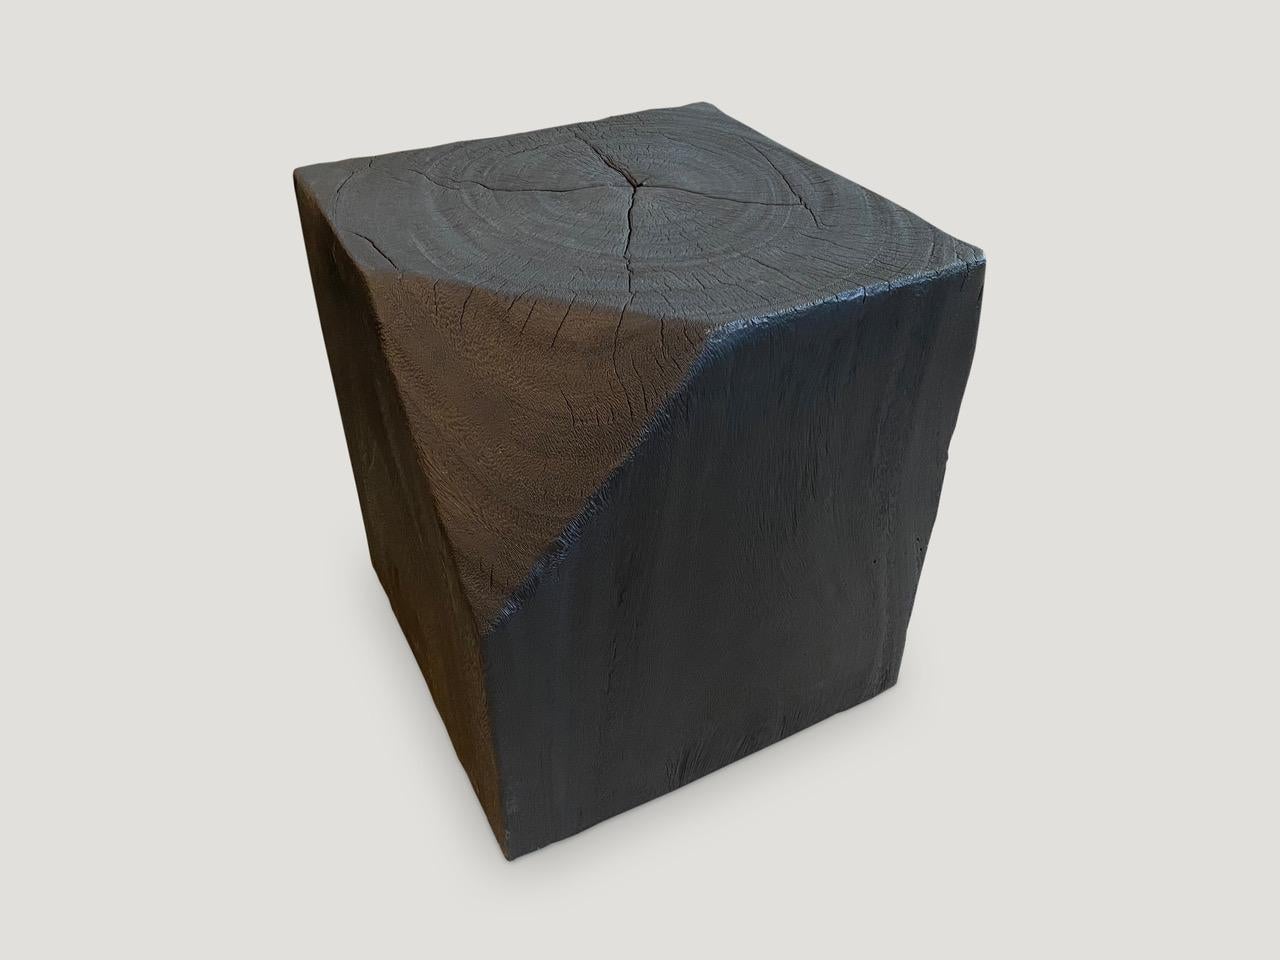 Faceted reclaimed mango wood side table, Charred, sanded and sealed revealing the beautiful wood grain. We have a collection. The price reflects one.

The Triple Burnt Collection represents a unique line of modern furniture made from solid organic